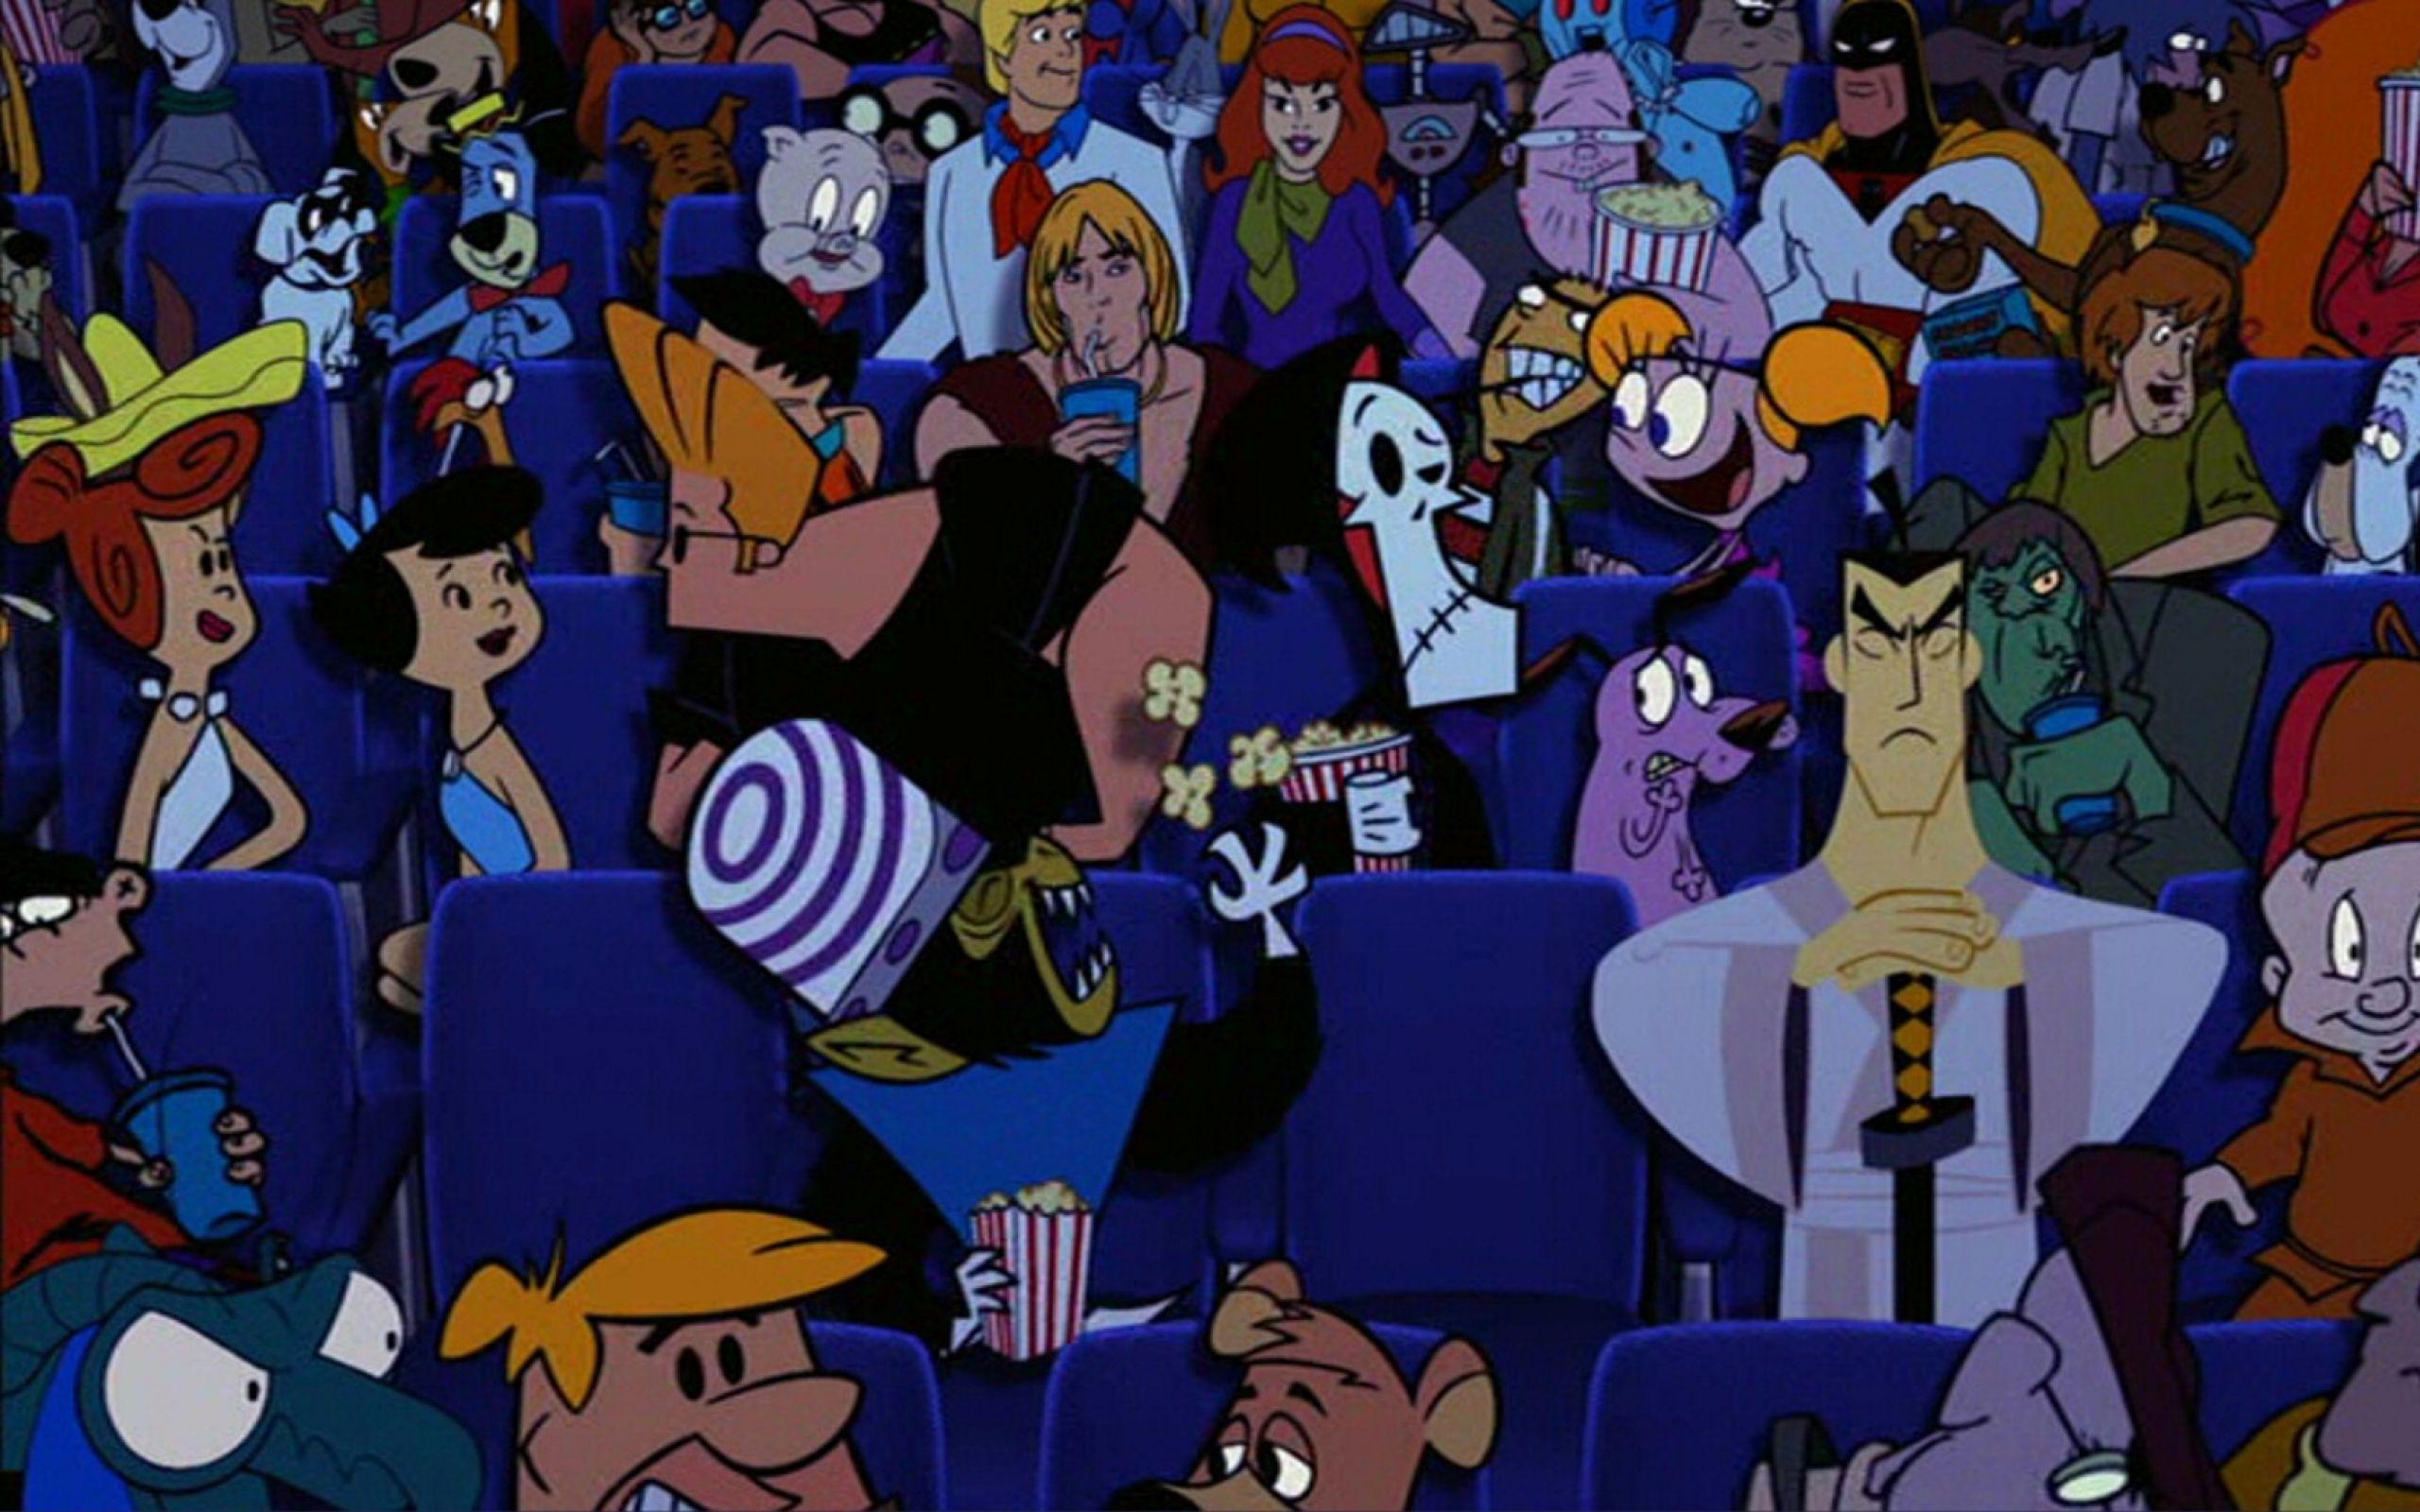 Johnny Bravo at the theatre wallpaper and image